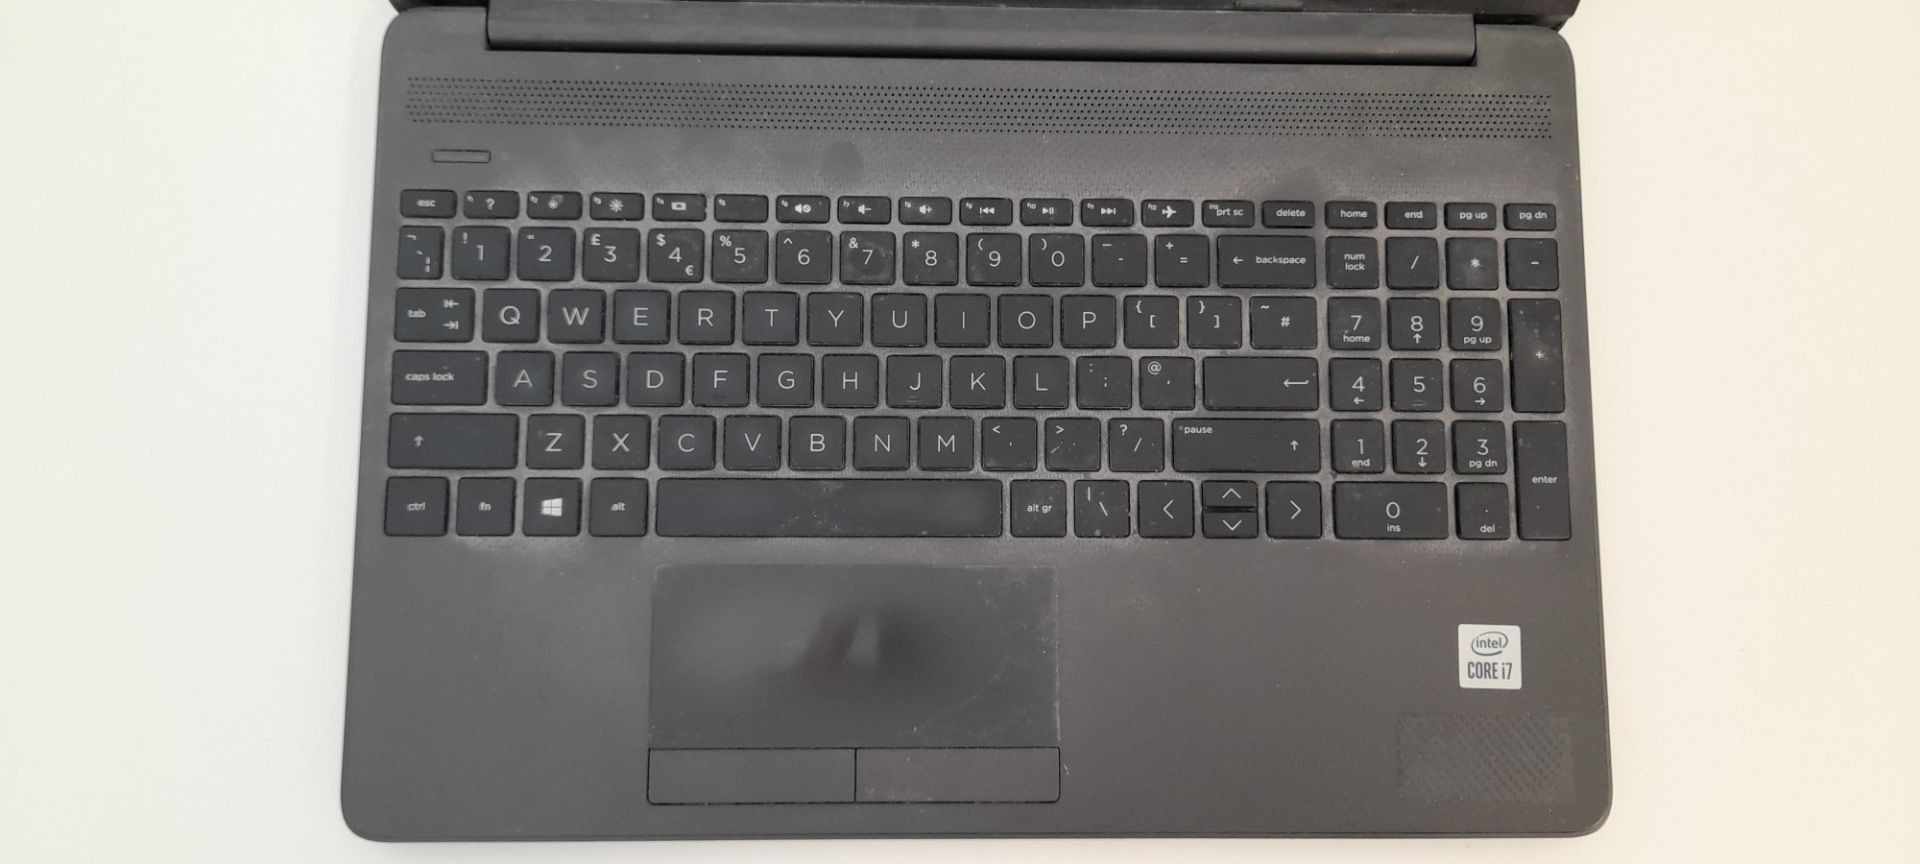 HP 250 G8 laptop with intel core i7. Collection from Canary Wharf, London, E14 - Image 3 of 7